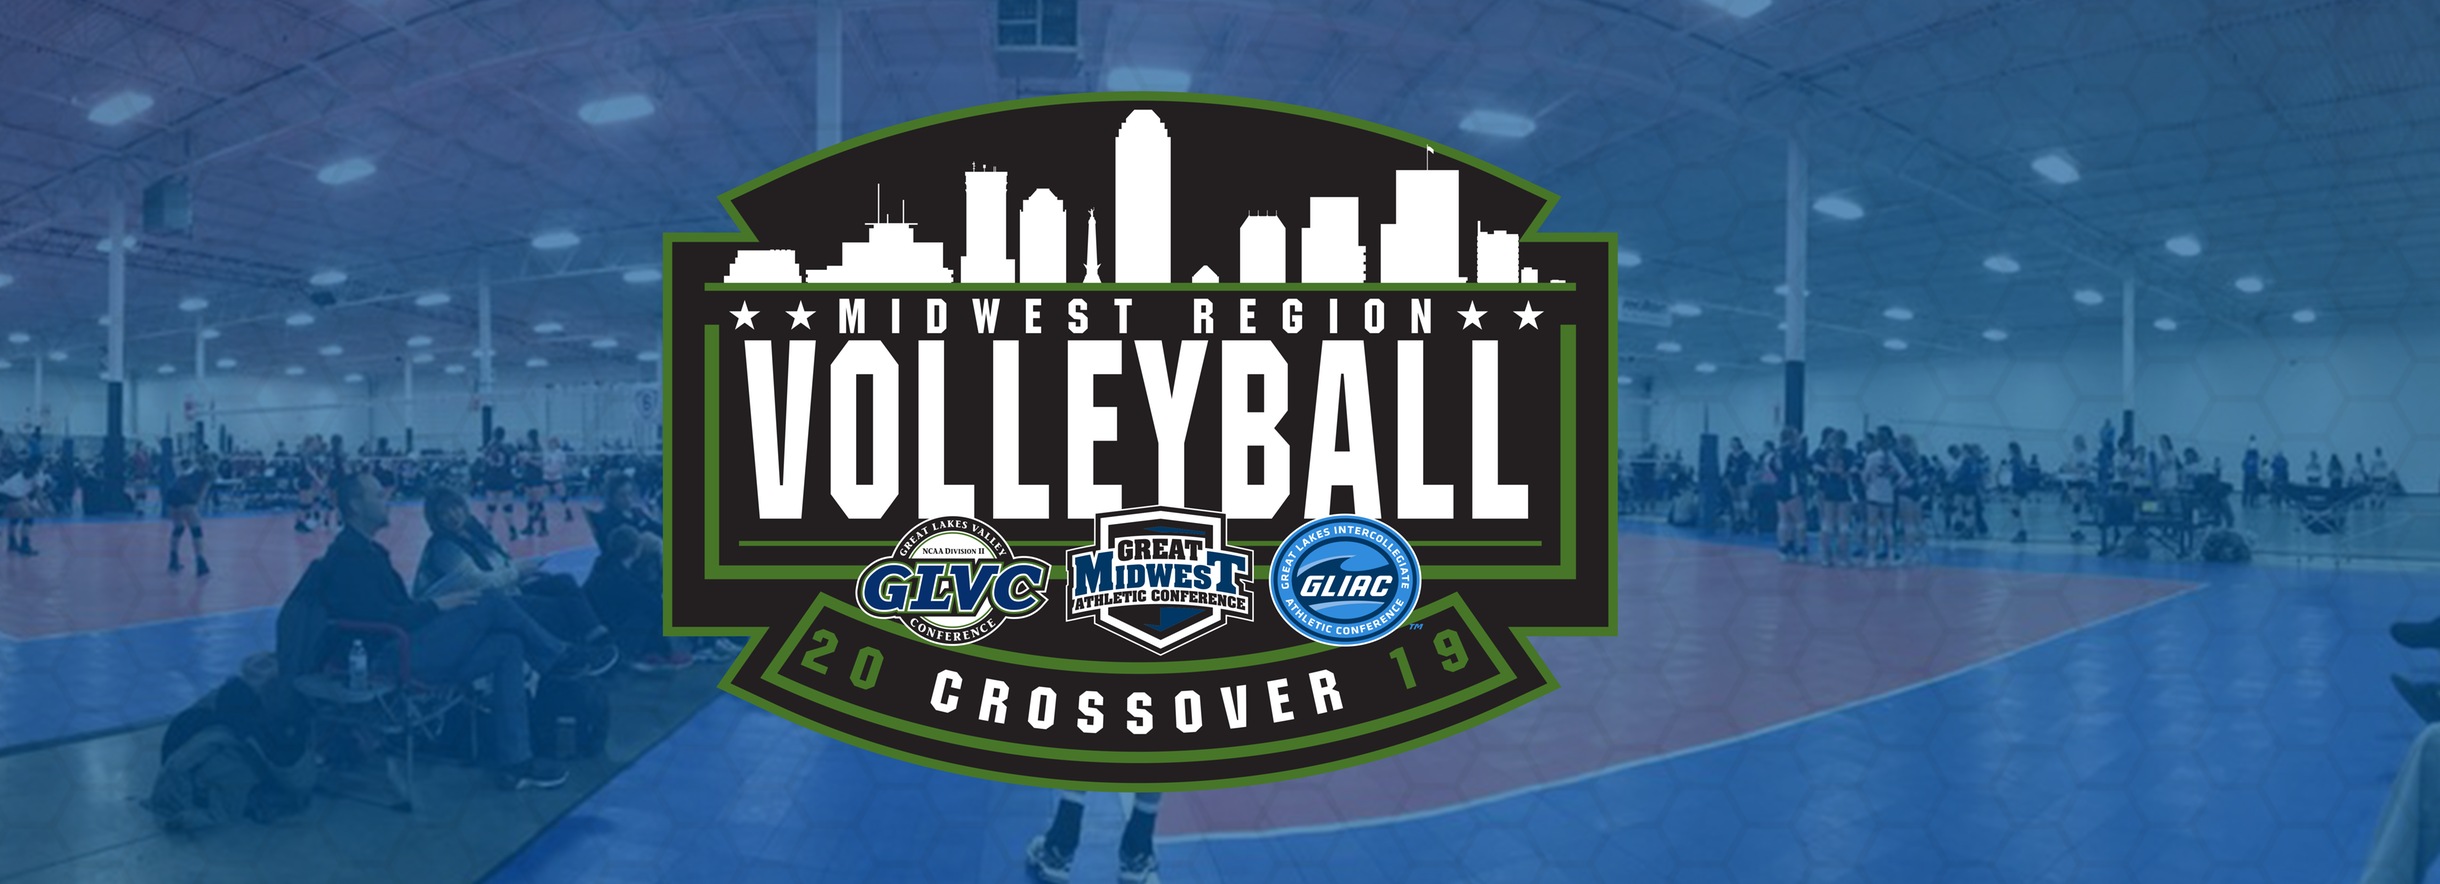 2019 Midwest Region Volleyball Crossover Begins Friday in Indianapolis